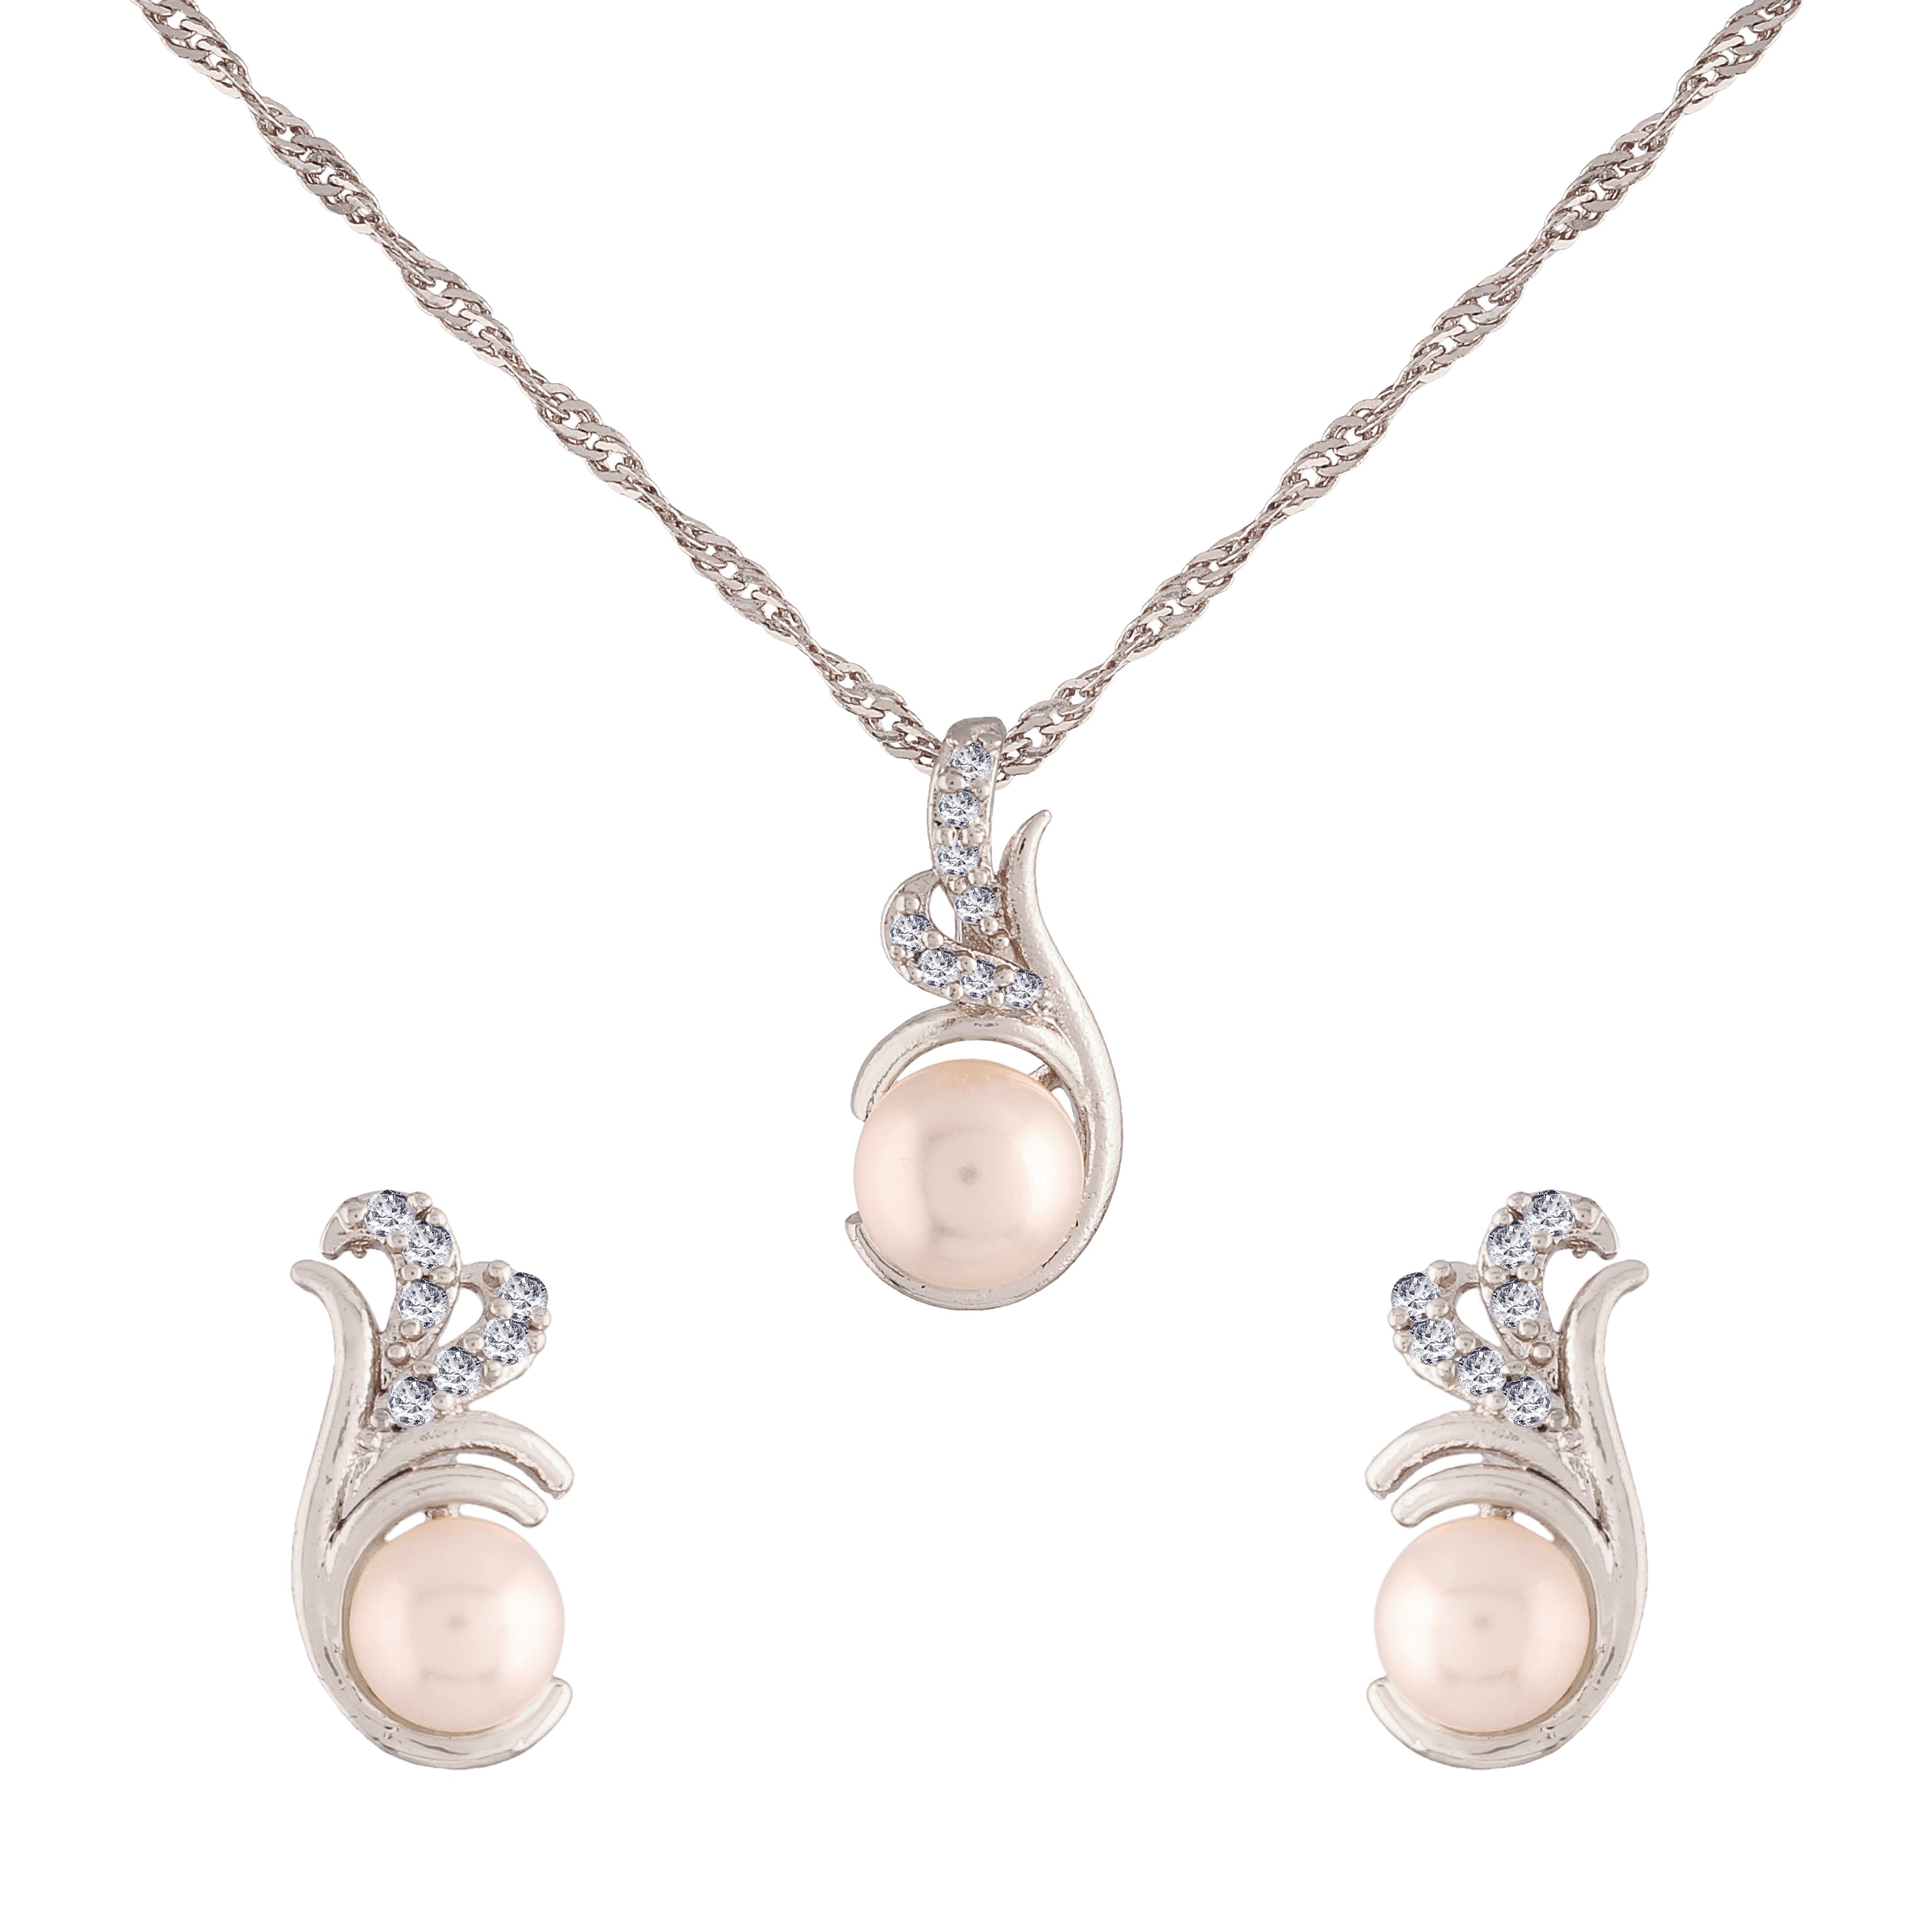 Women's 18k Rhodium Plated Pearl & Cubic Zirconia Twisted Pendant Necklace Set with Earrings - I Jewels